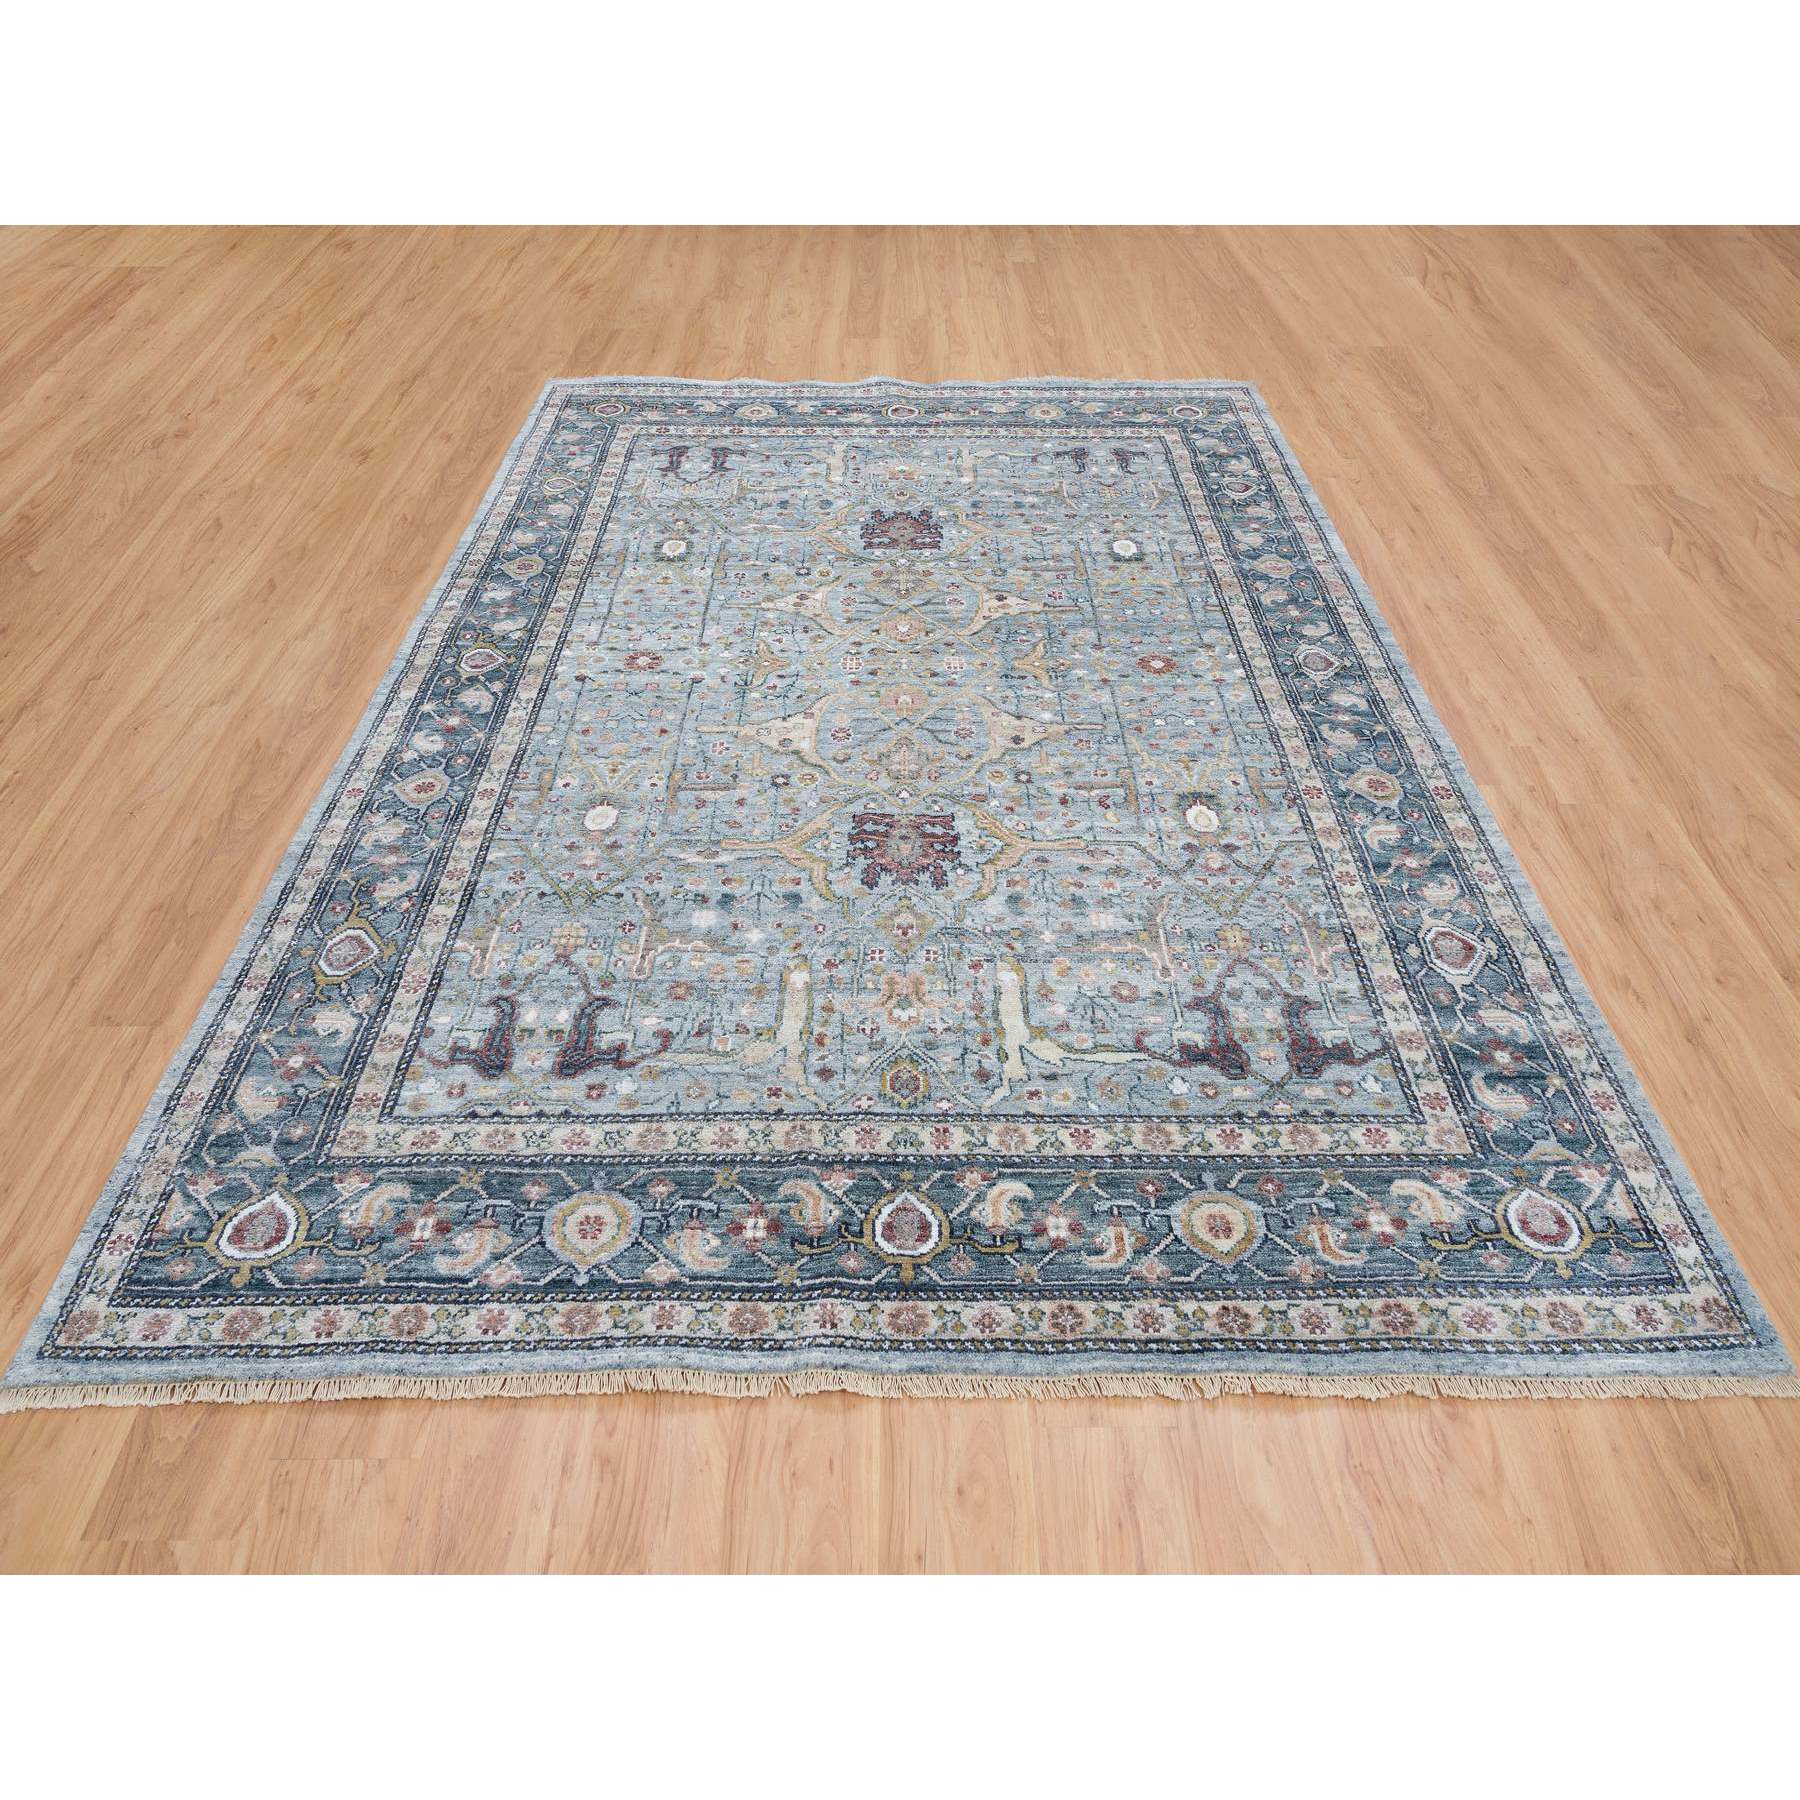 8'x9'9" Light Blue, Bidjar Garus Heritage Design with Soft Colors Thick and Plush, Hand Woven Pure Wool, Oriental Rug 